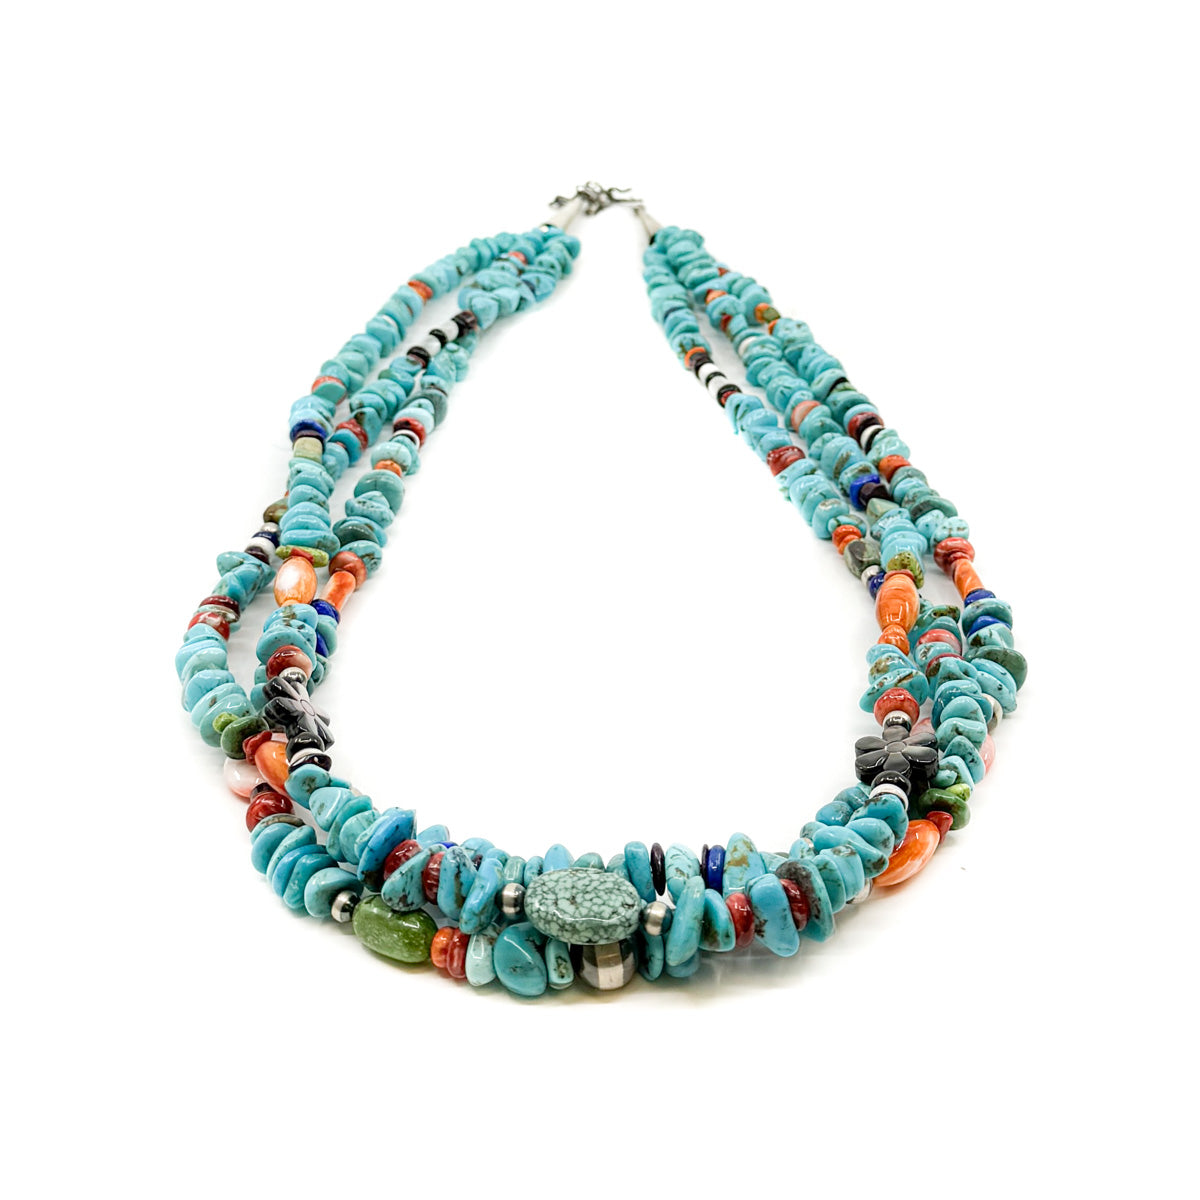 Beautiful Turquoise and Mixed Gemstone Bead Necklace by Daniel Coriz